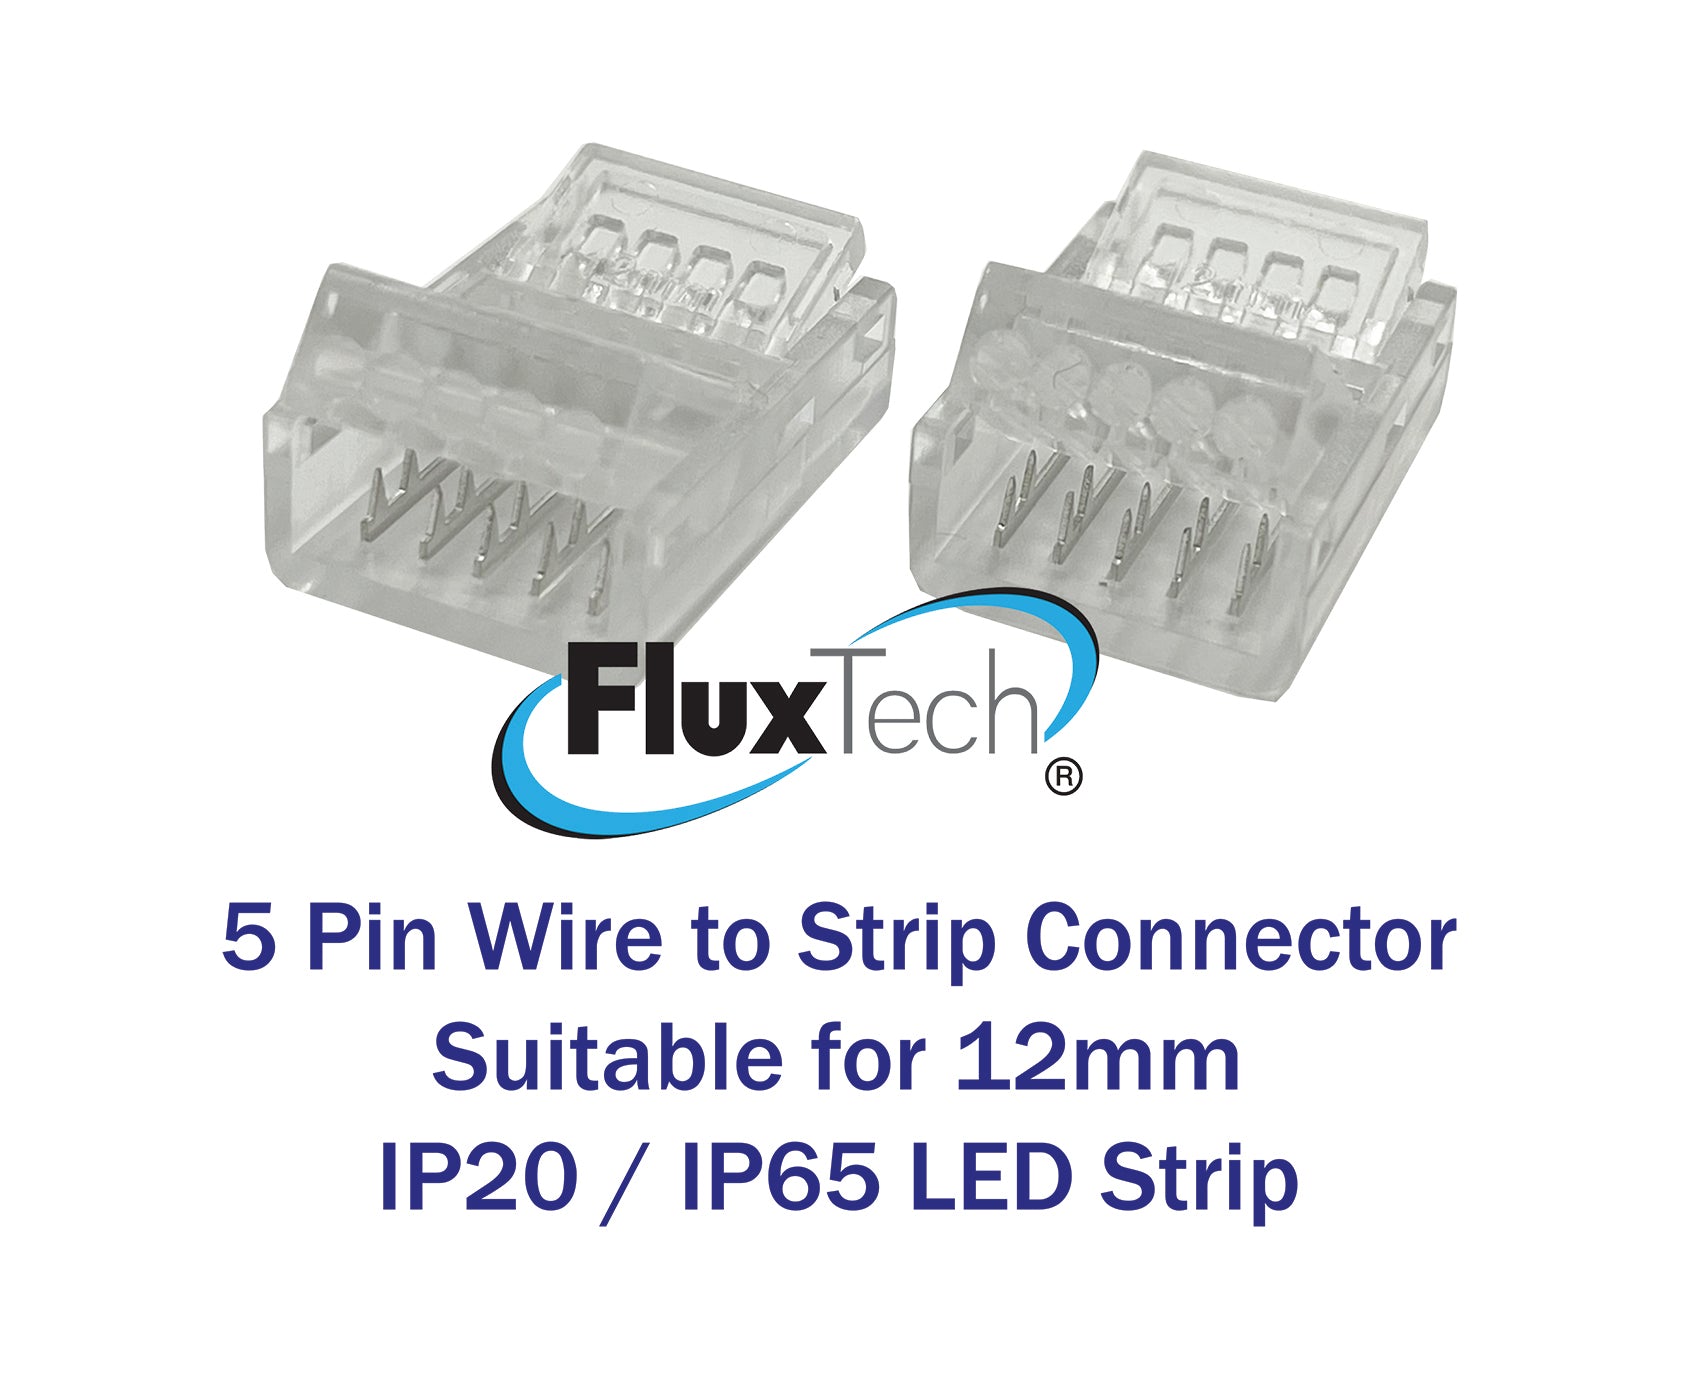 FluxTech - IP20 / IP65 Strip to Wire Crystal Connector for 10/12mm Strip. Pack x 2 Pcs